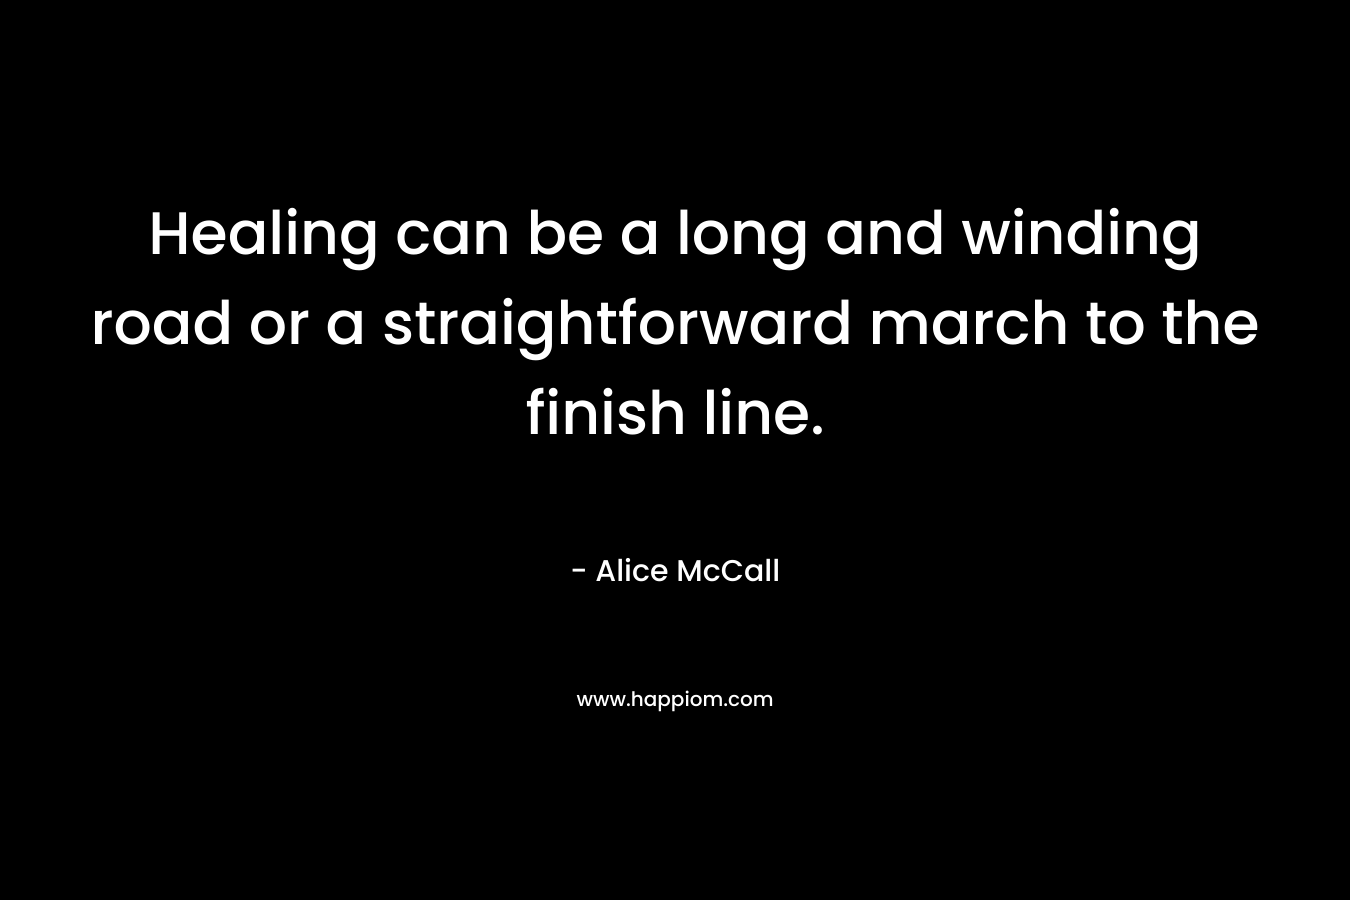 Healing can be a long and winding road or a straightforward march to the finish line.